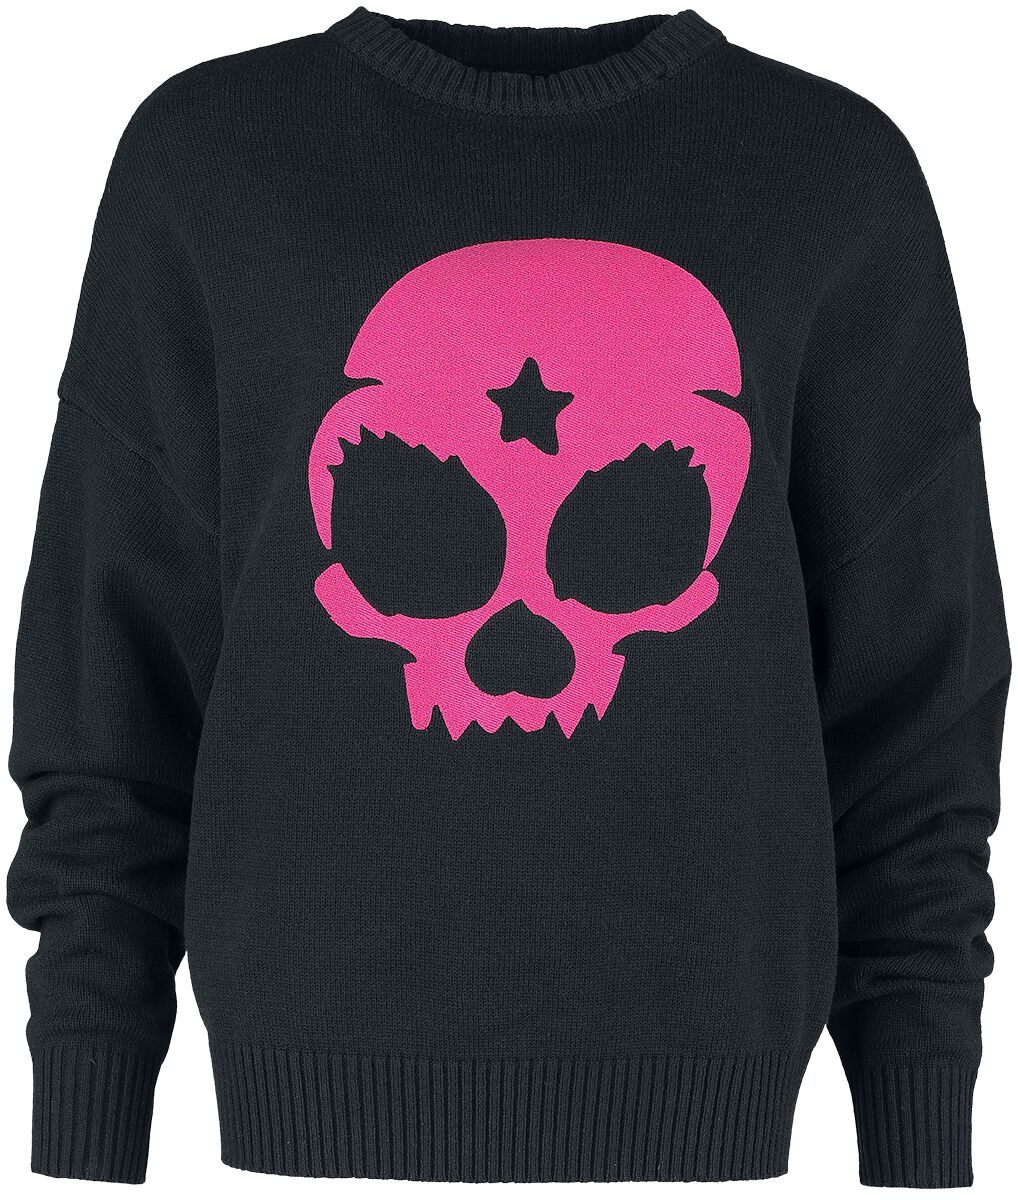 Full Volume by EMP Knitted sweater with playful skull Knit jumper black